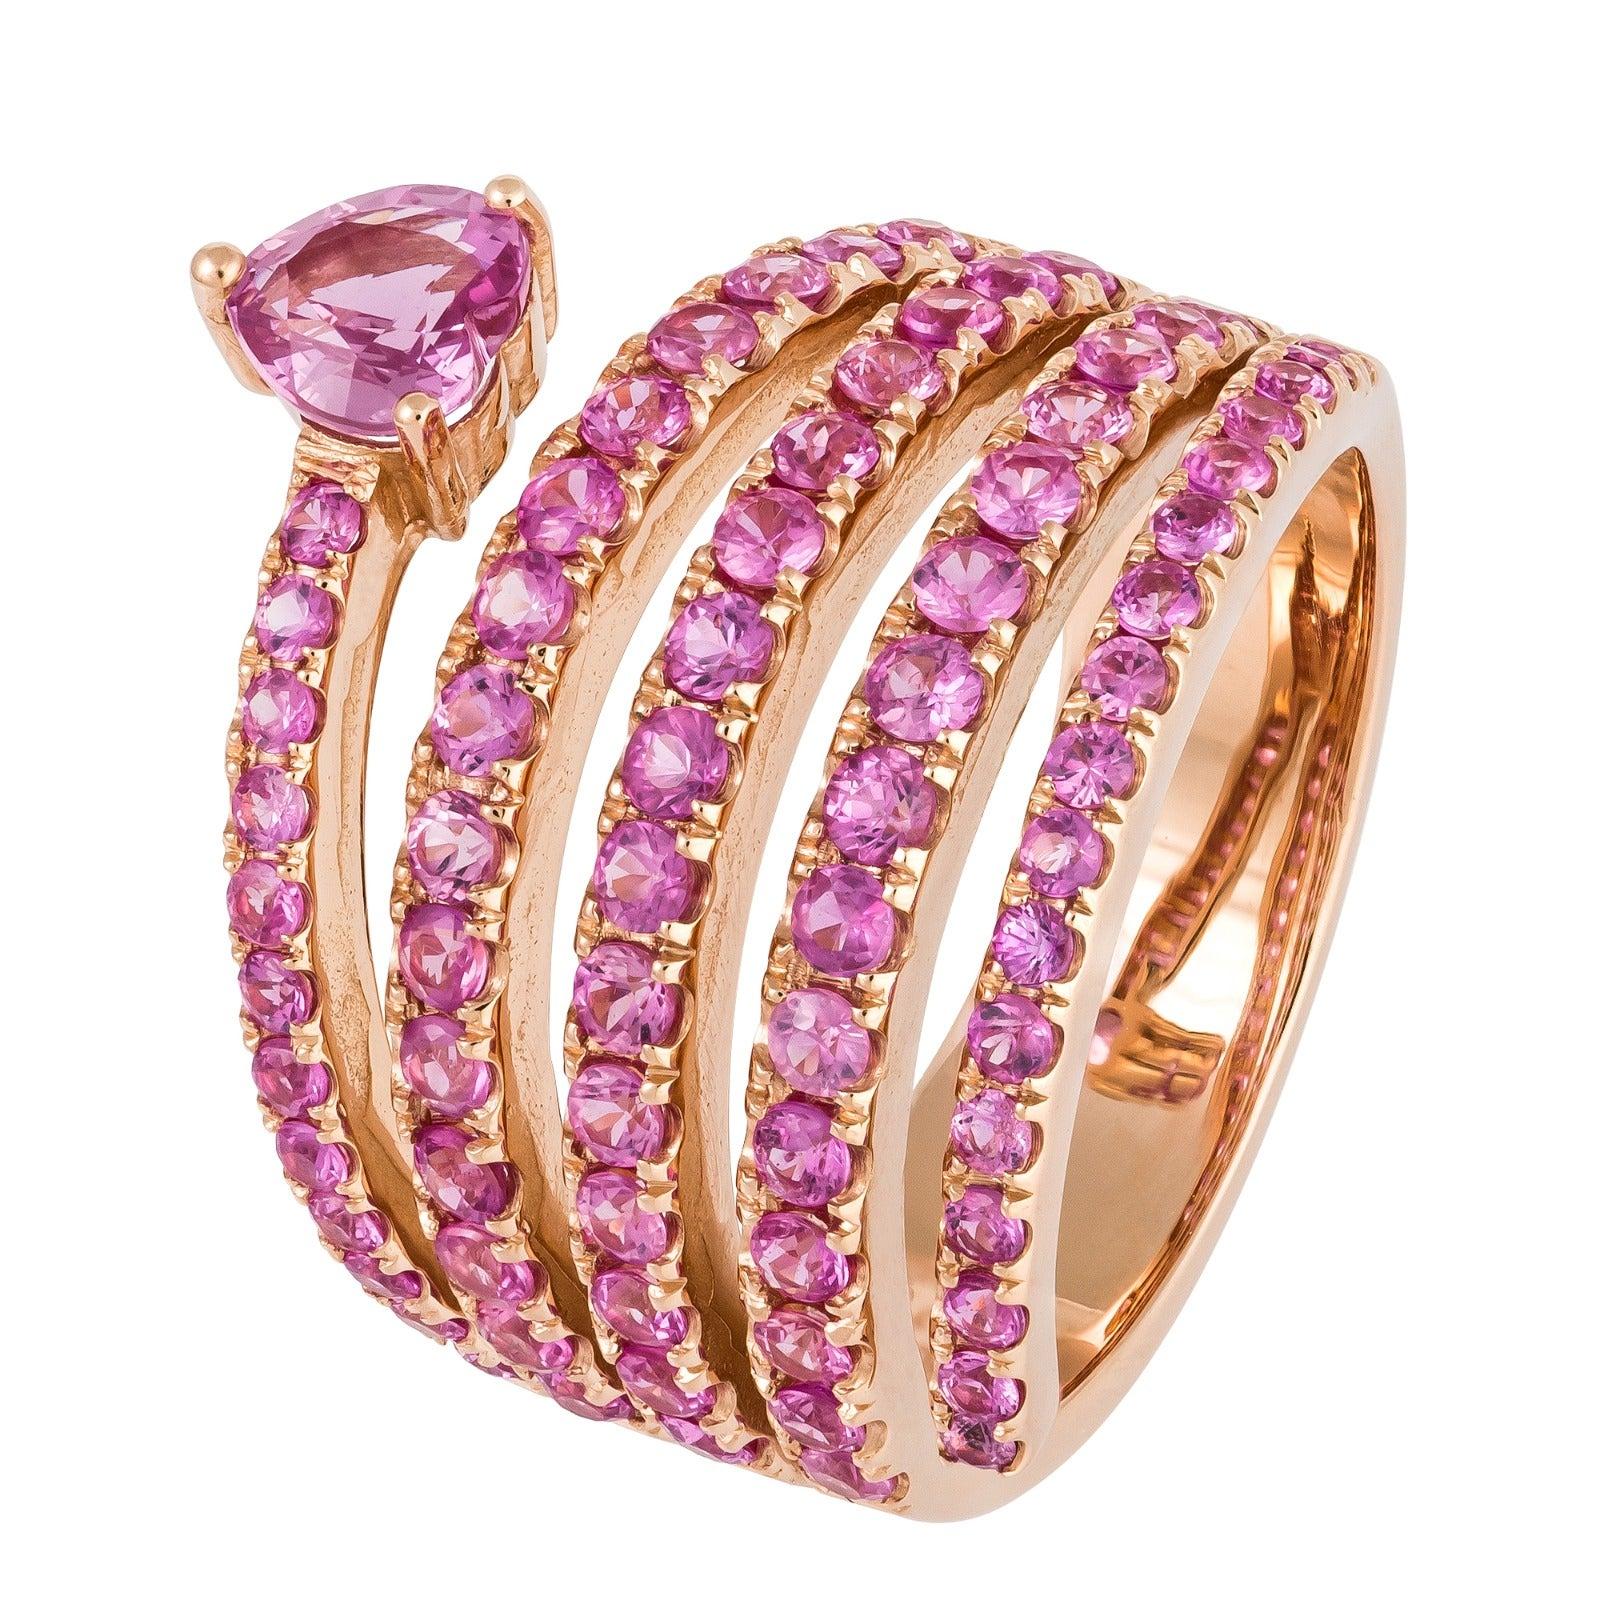 Stylish Fashionable Pink Sapphire Statement Rose Gold Ring for Her For Sale